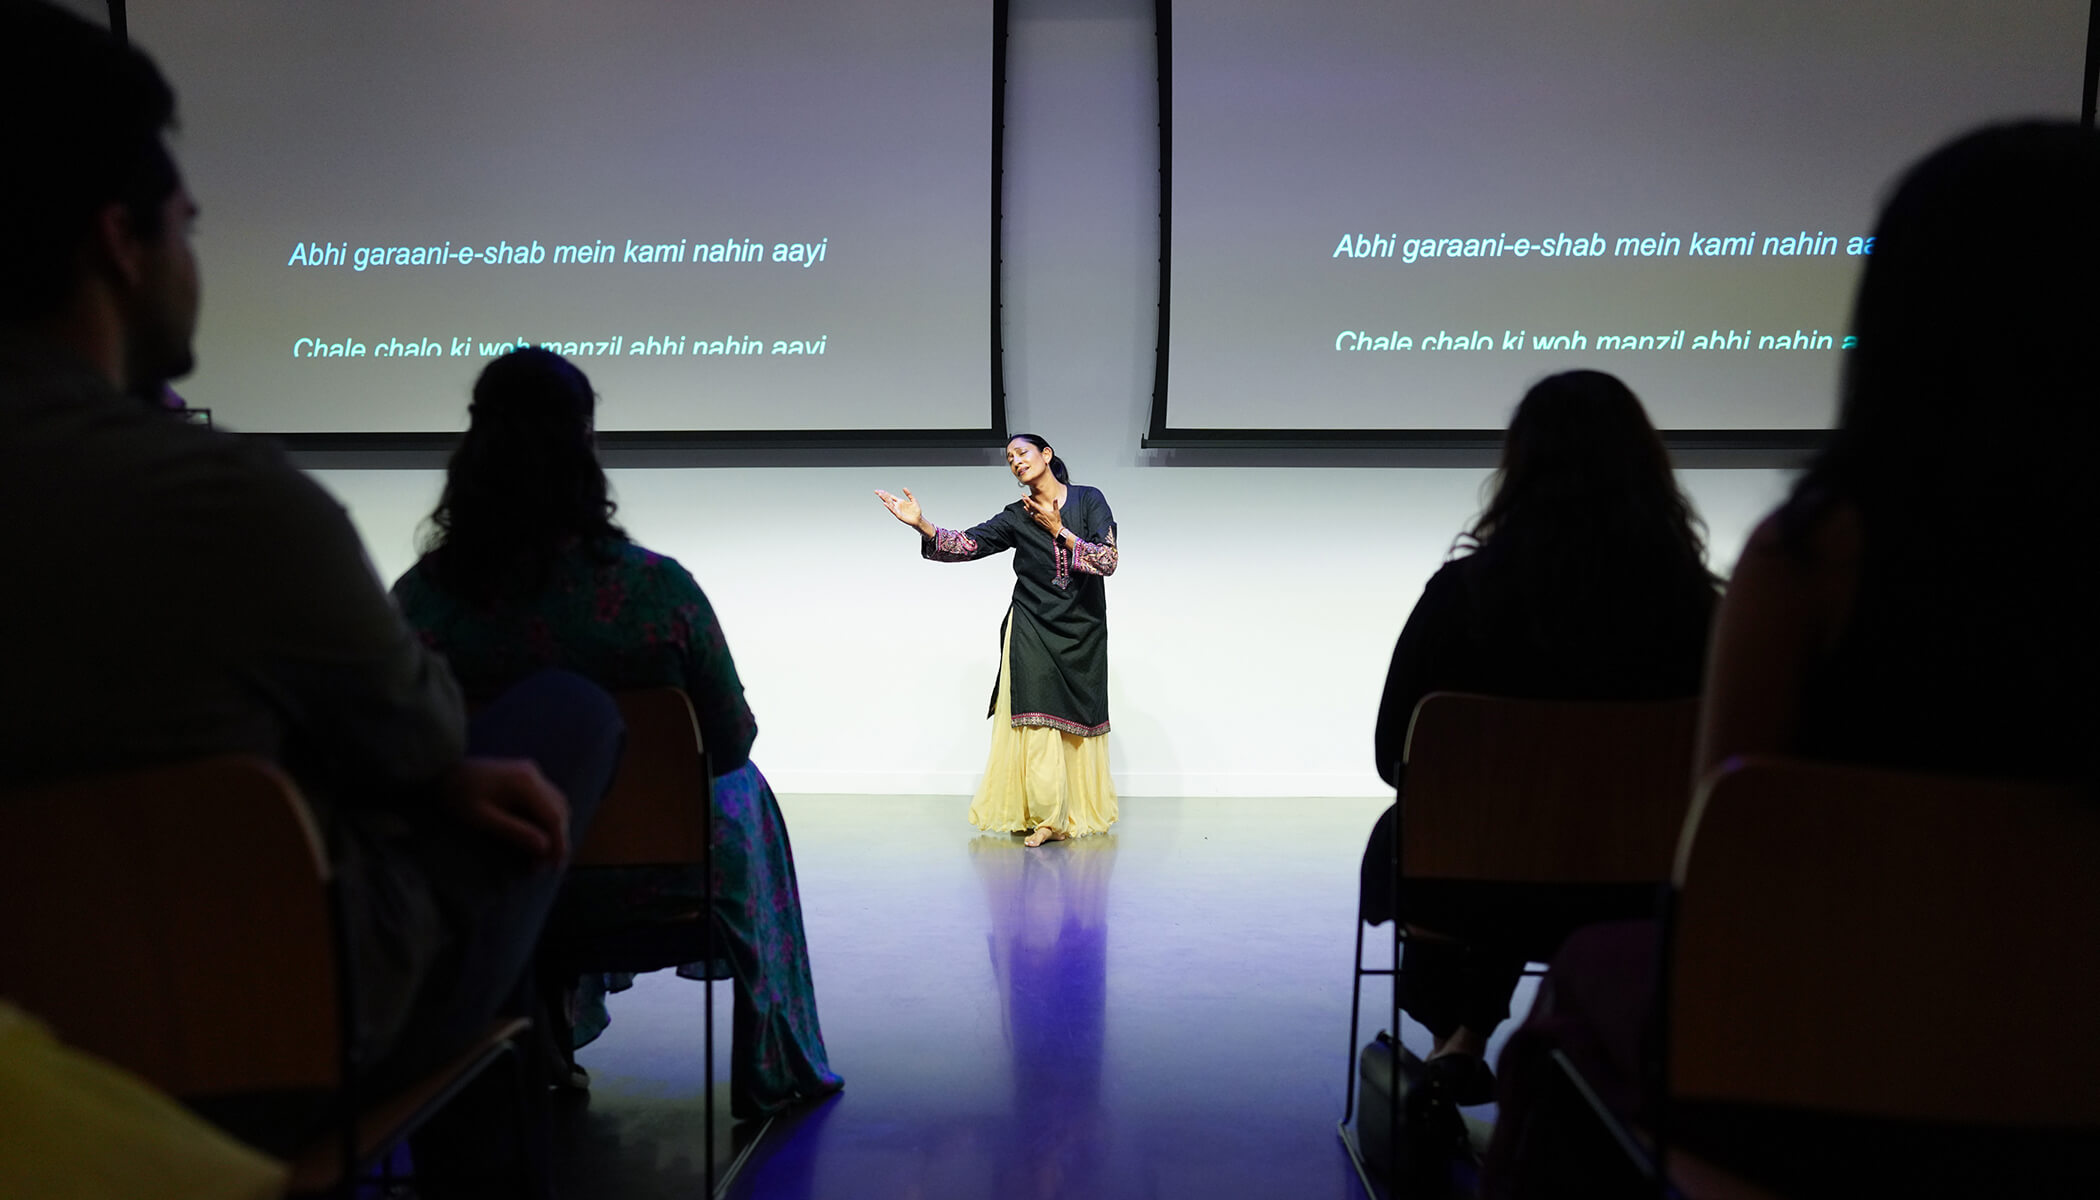 A woman in black and yellow dances in front of two screens with Urdu words on them. Shadows of audience members are in the foreground.